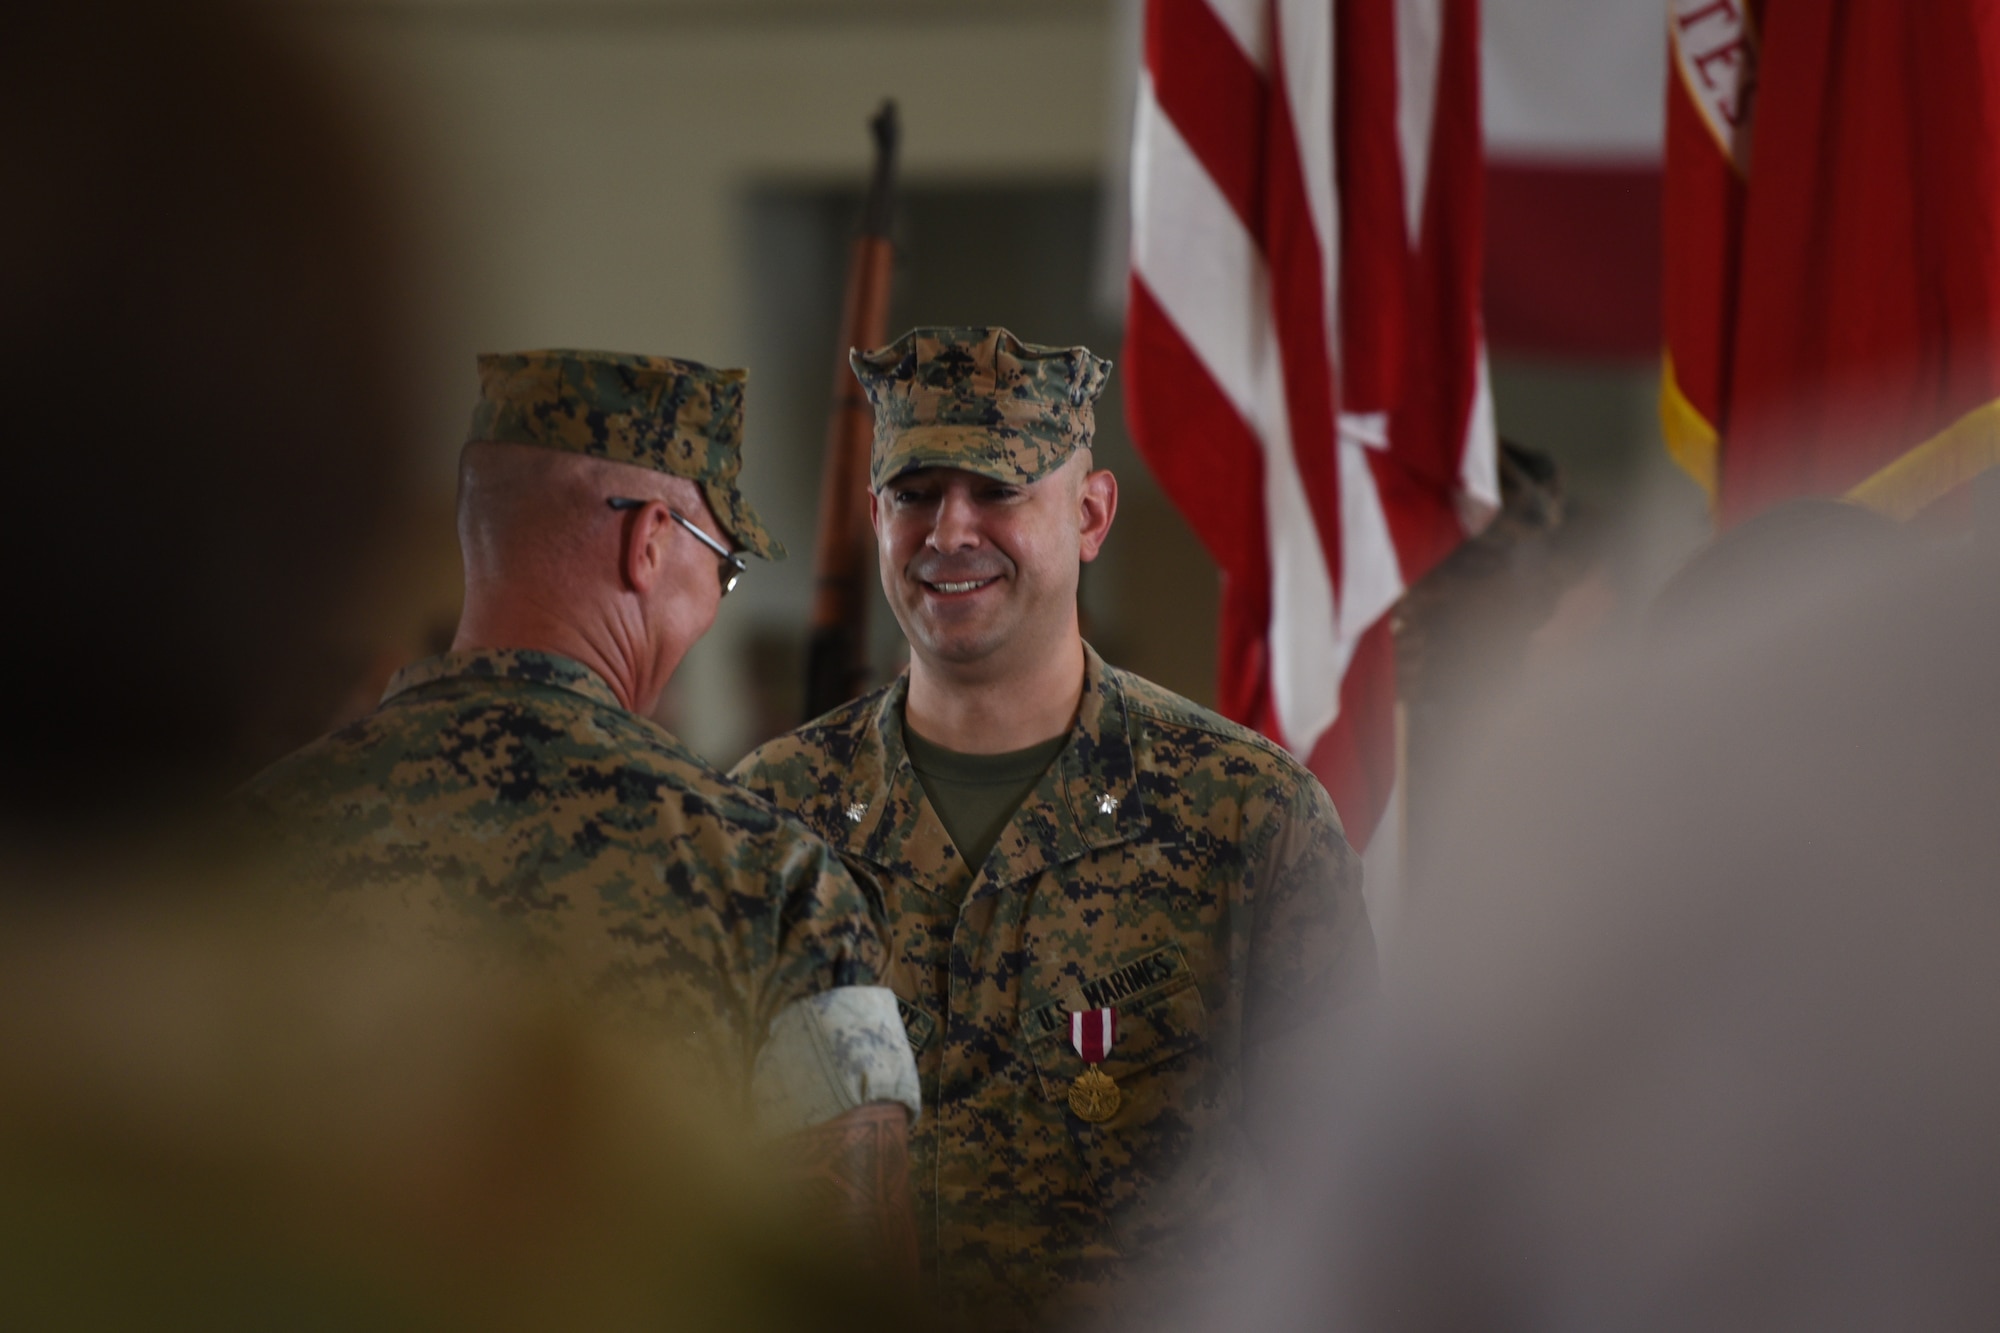 U.S. Marine Corps Lt. Col. Arturo Derryberry, outgoing Marine Corps Detachment commanding officer, receives the Meritorious Service Medal, during the MCD change of command at Goodfellow Air Force Base, Texas, June 24, 2022. Derryberry served as MCD’s commanding officer for two years. (U.S. Air Force photo by Senior Airman Abbey Rieves)